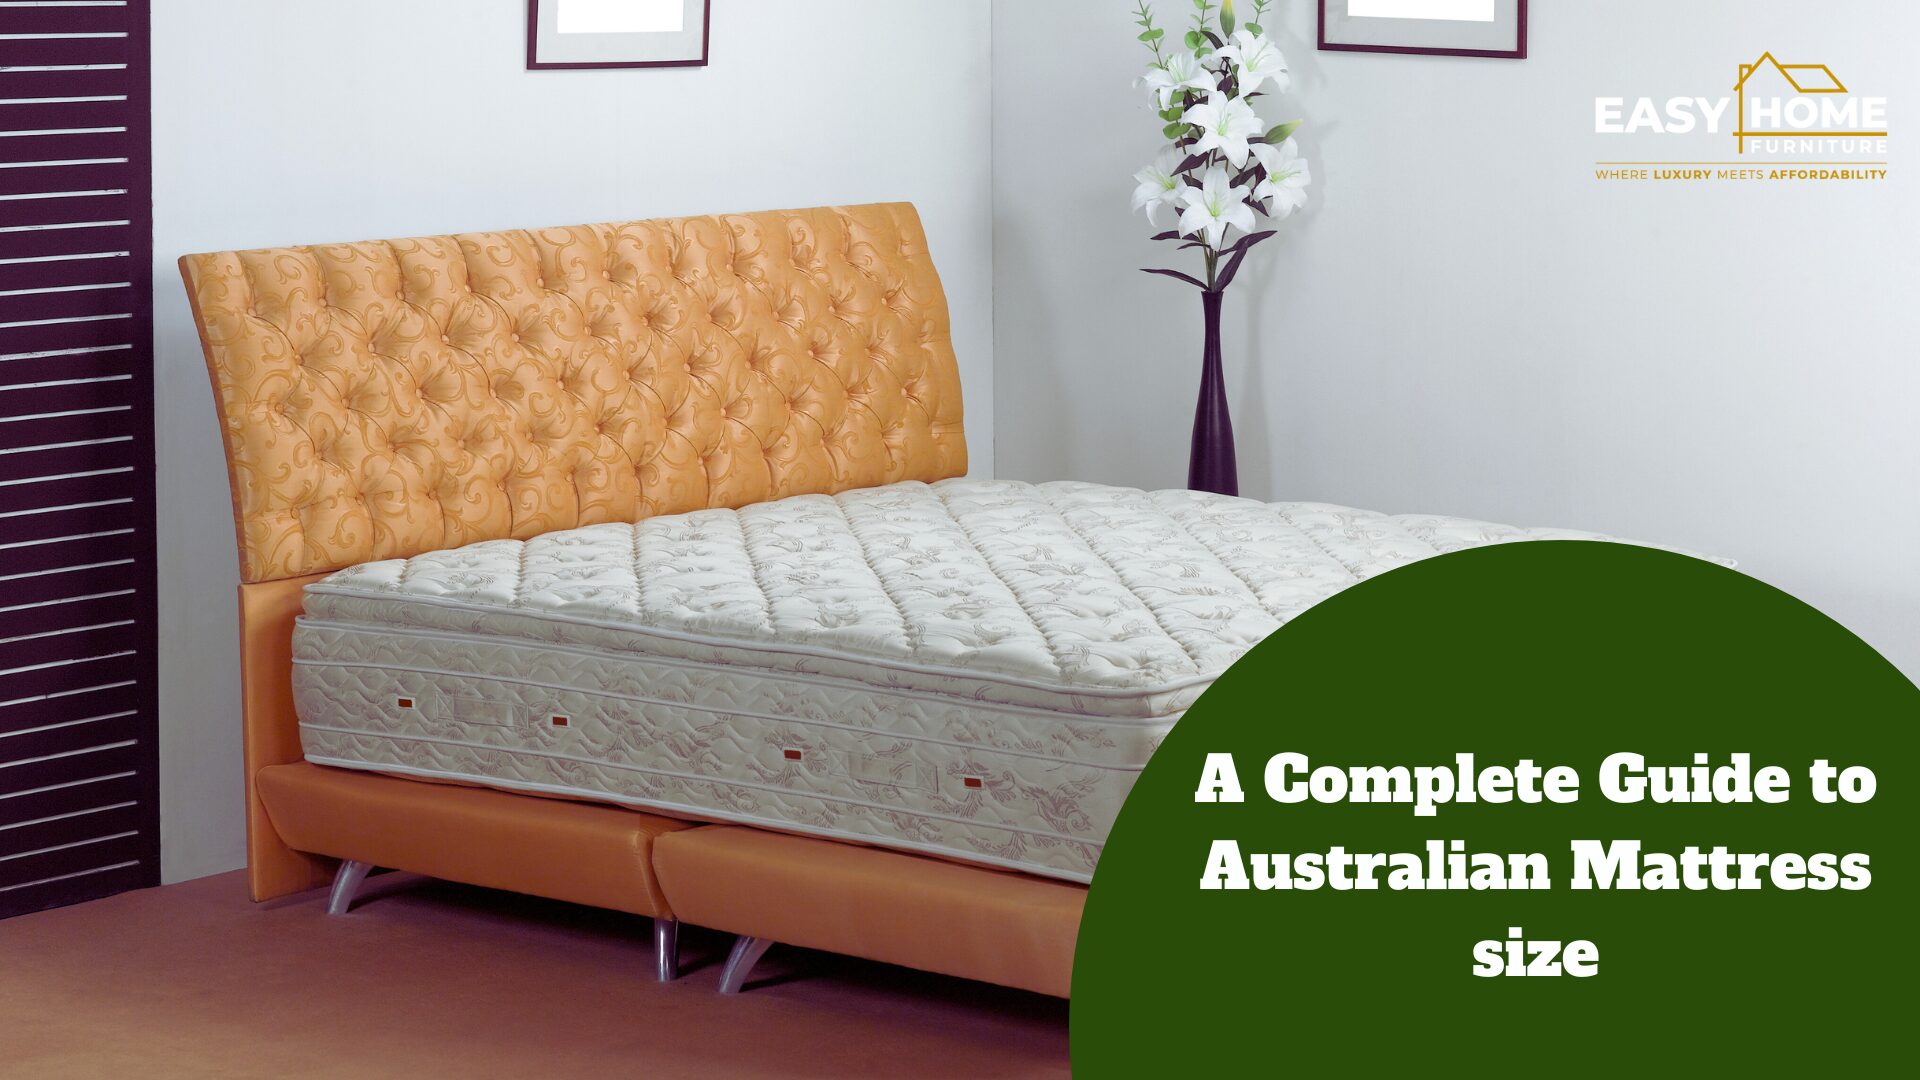 What are the mattress sizes in Australia